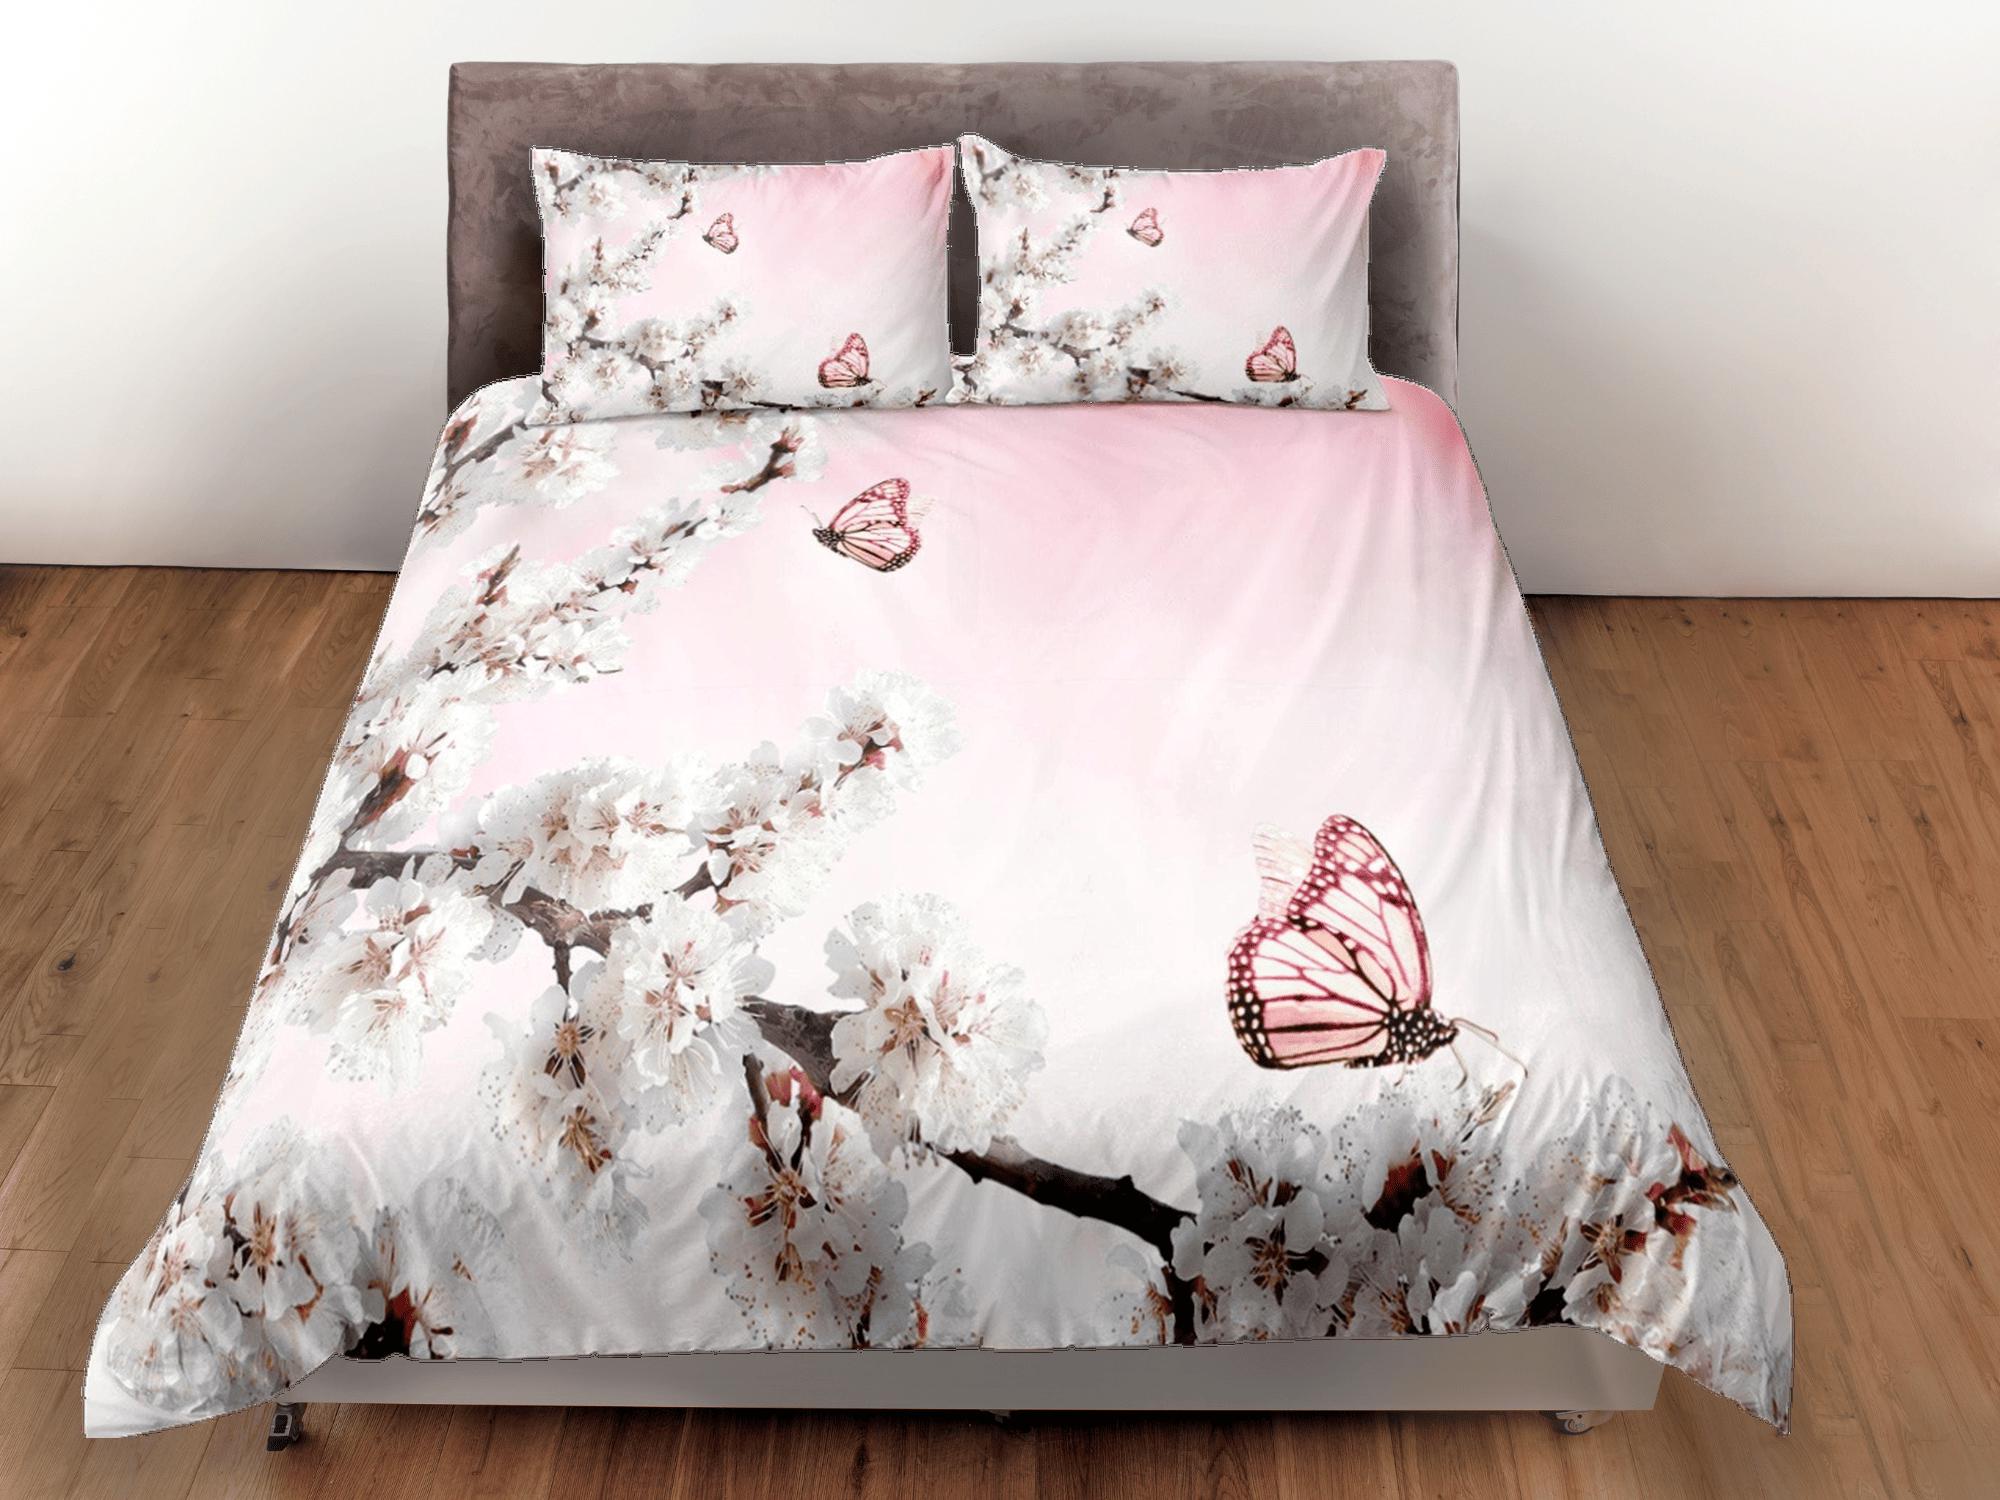 daintyduvet Cherry blossom and butterfly bedding, pink duvet cover, floral printed dorm bedding, aesthetic bedding, maximalist full size bedding